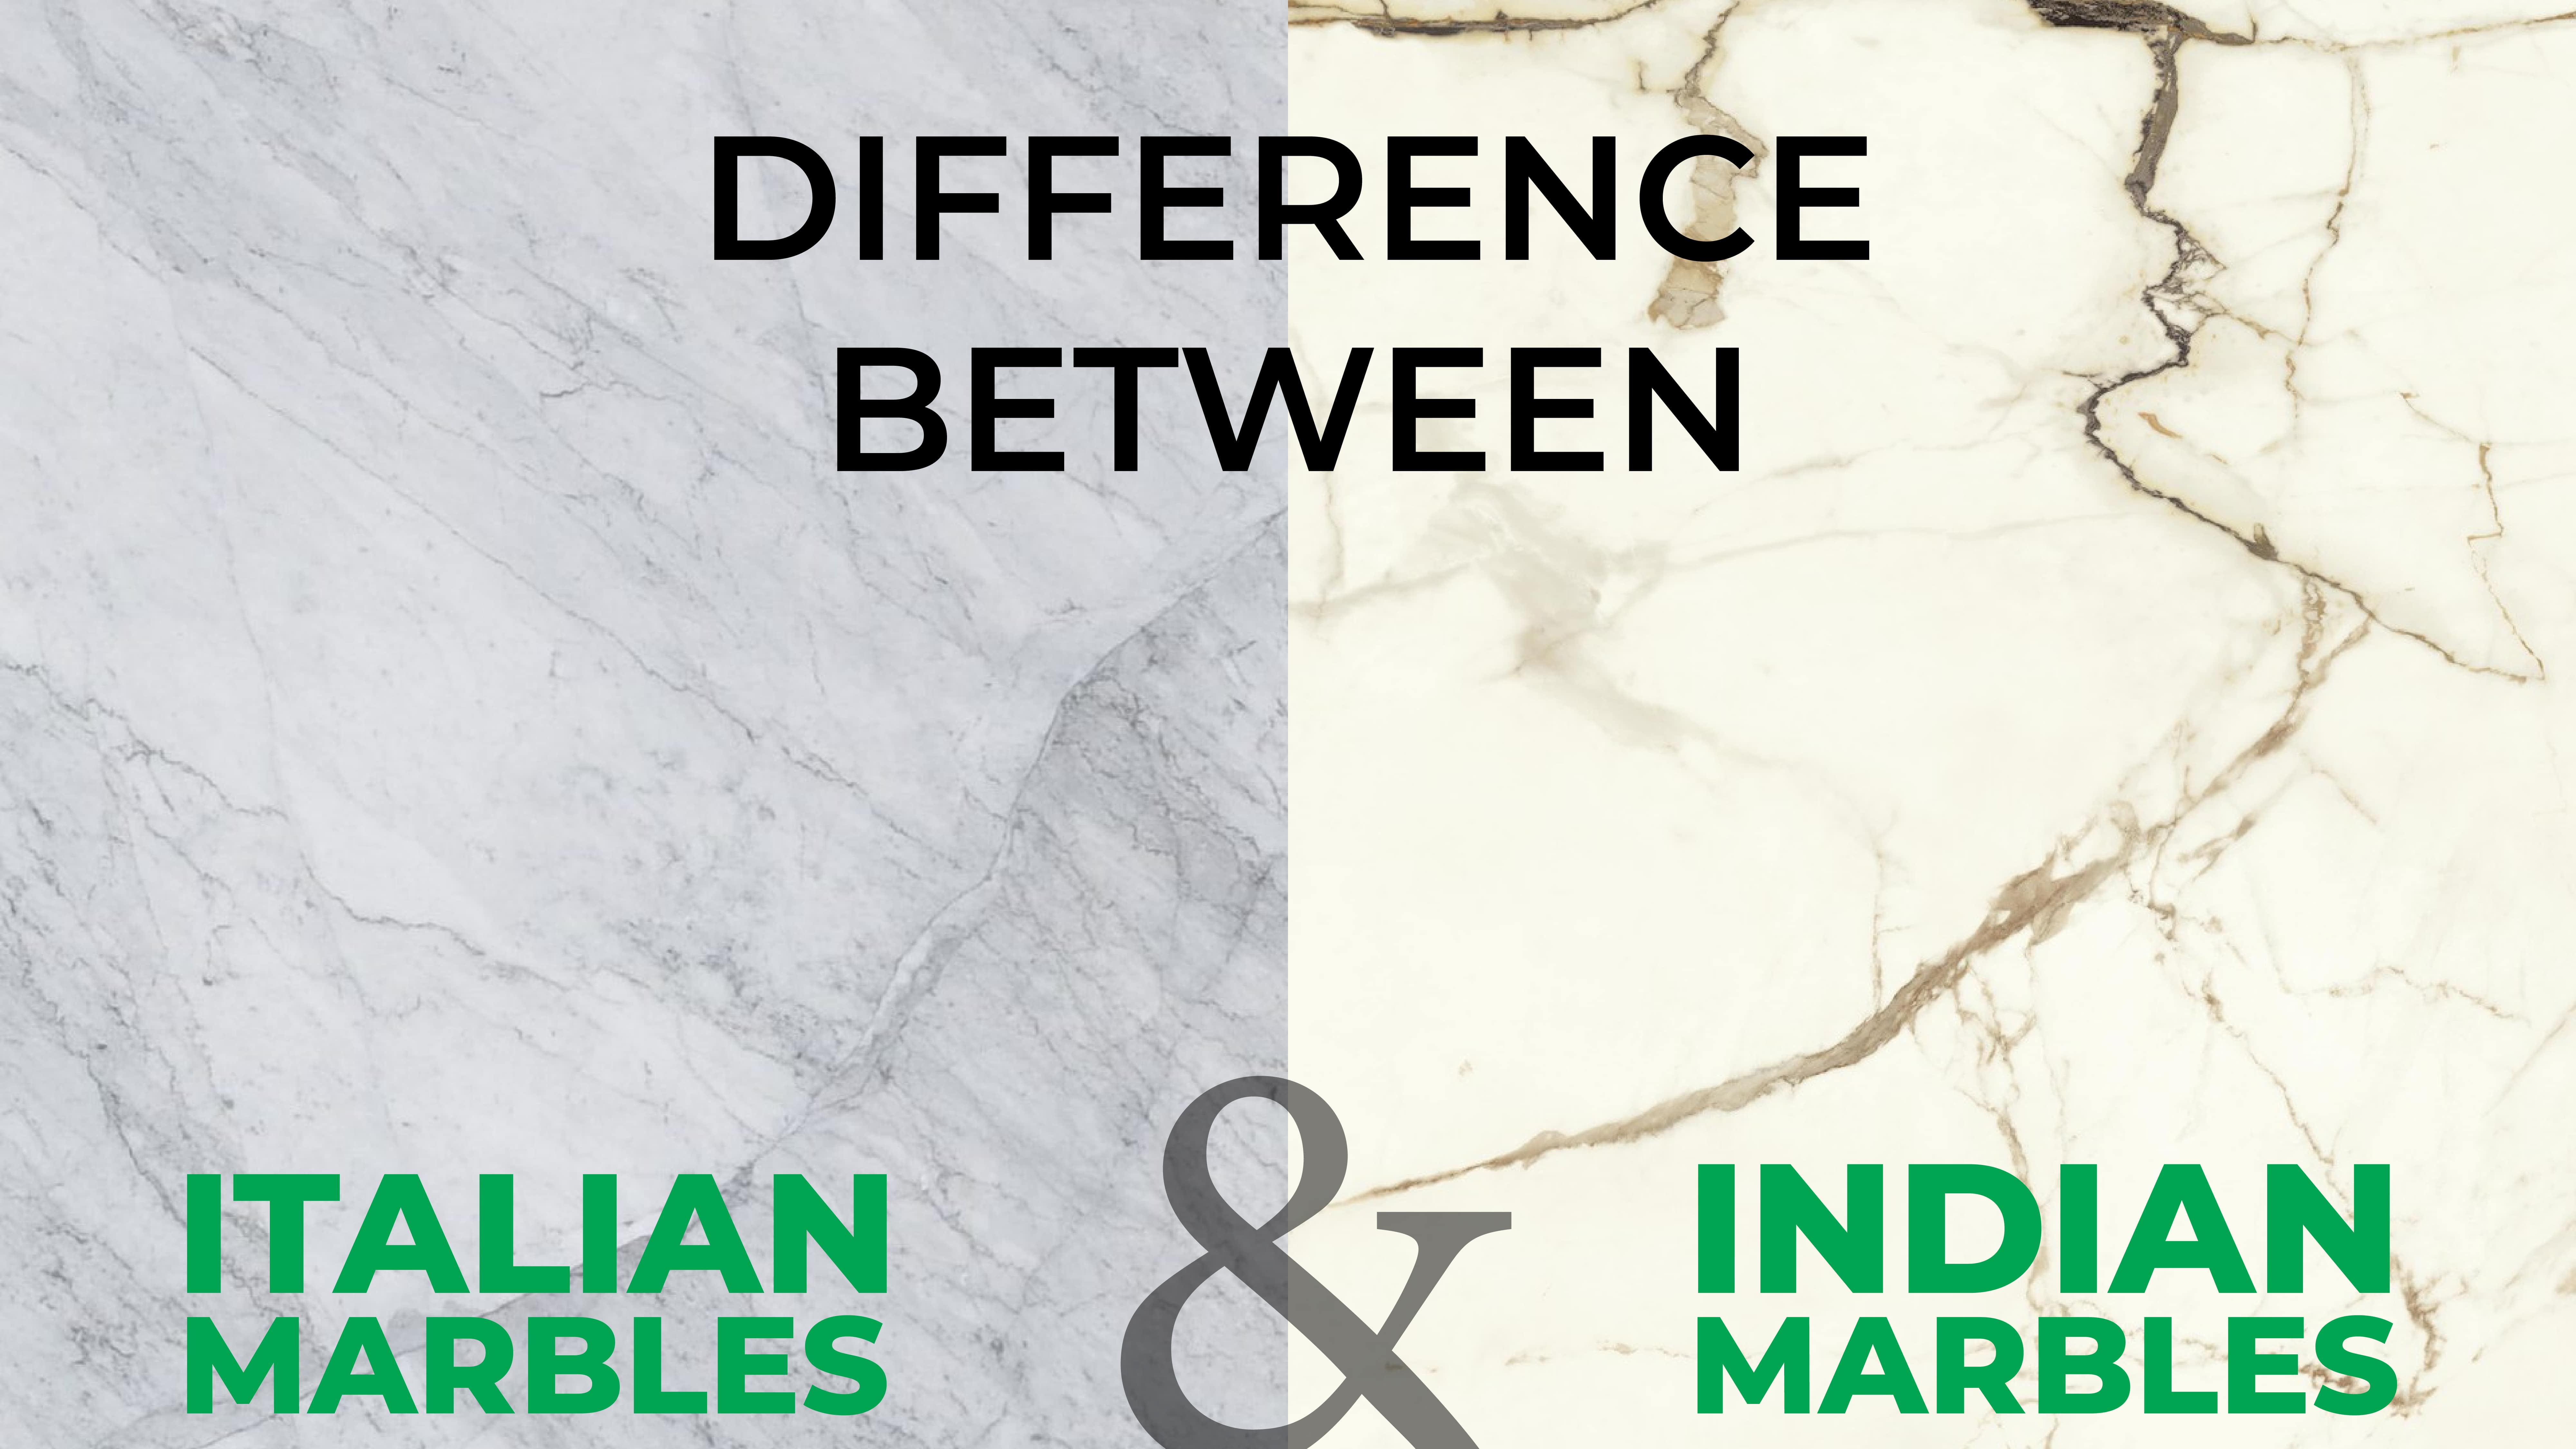 Difference between Italian marbles and Indian Marbles